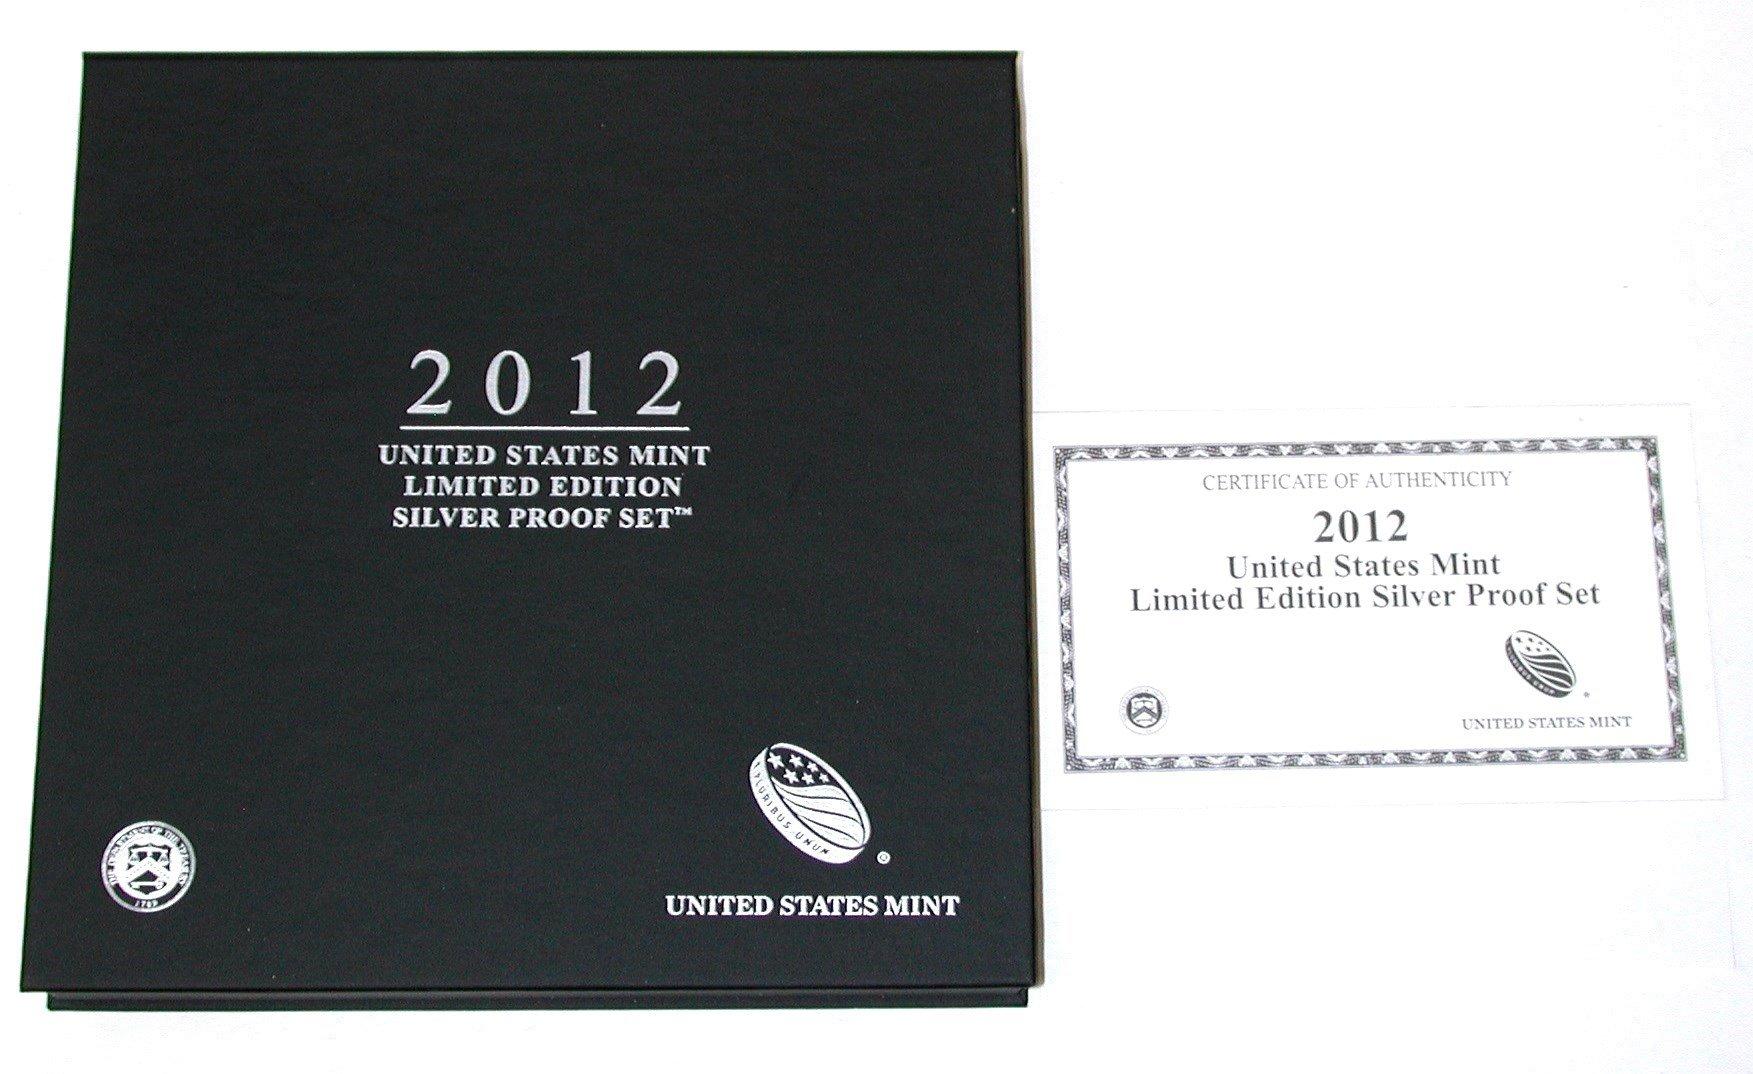 2012 LIMITED EDITION SILVER PROOF SET